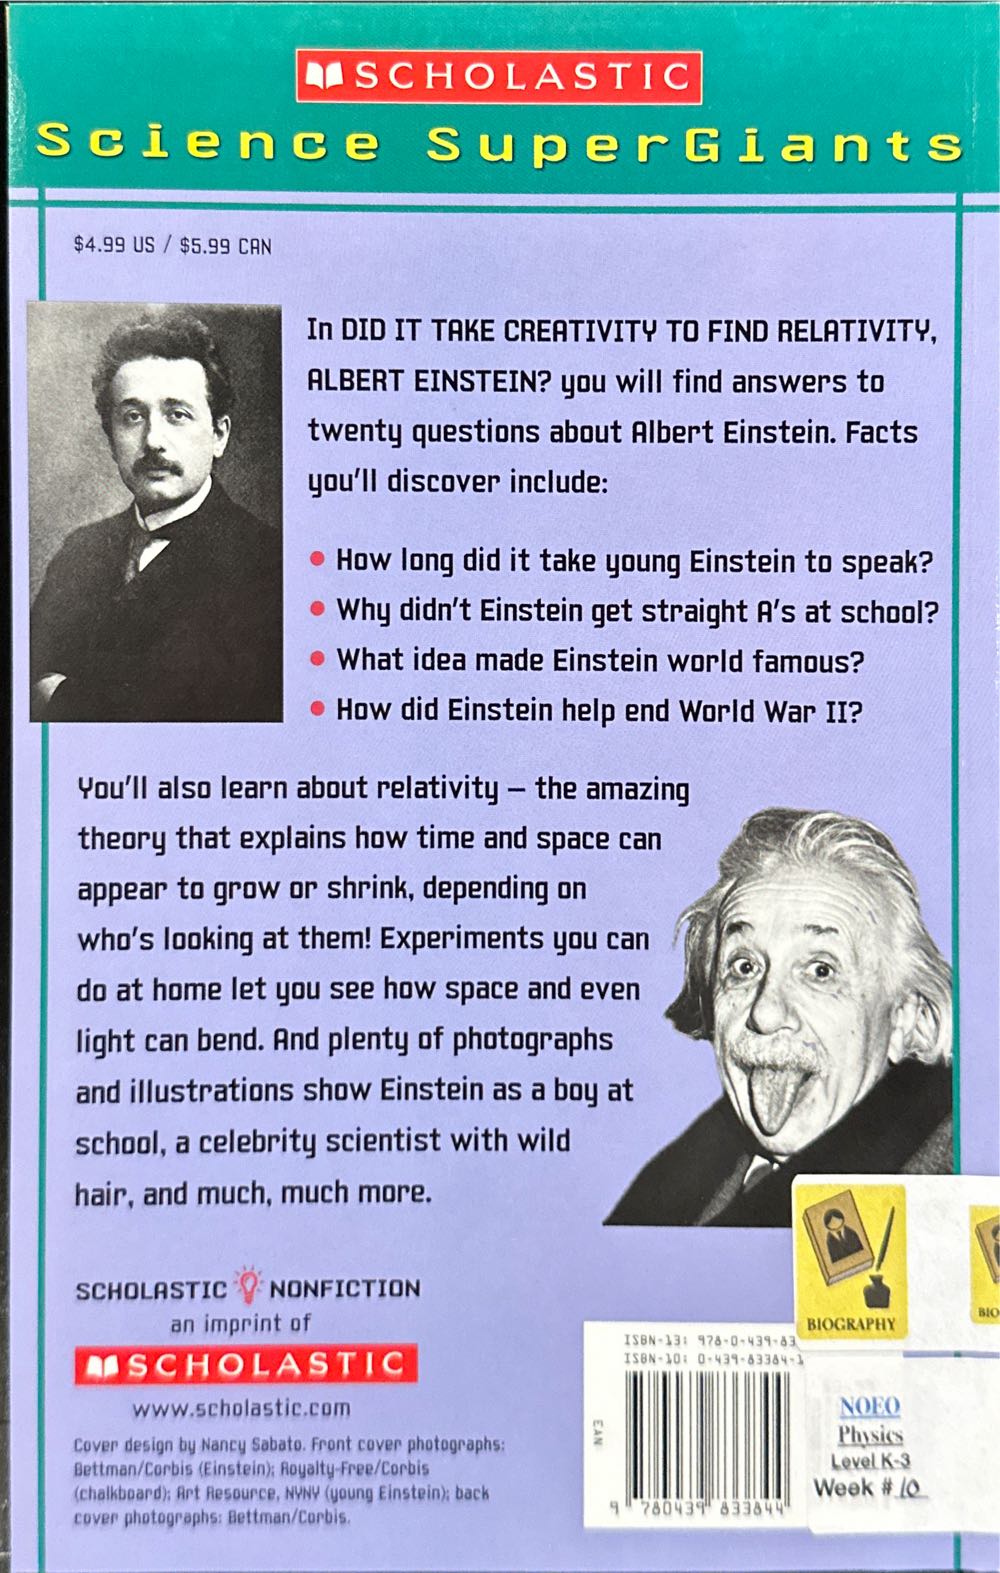 Did It Take Creativity To Find Relativity, Albert Einstein? - Melvin Berger (Scholastic Nonfiction - Paperback) book collectible [Barcode 9780439833844] - Main Image 3